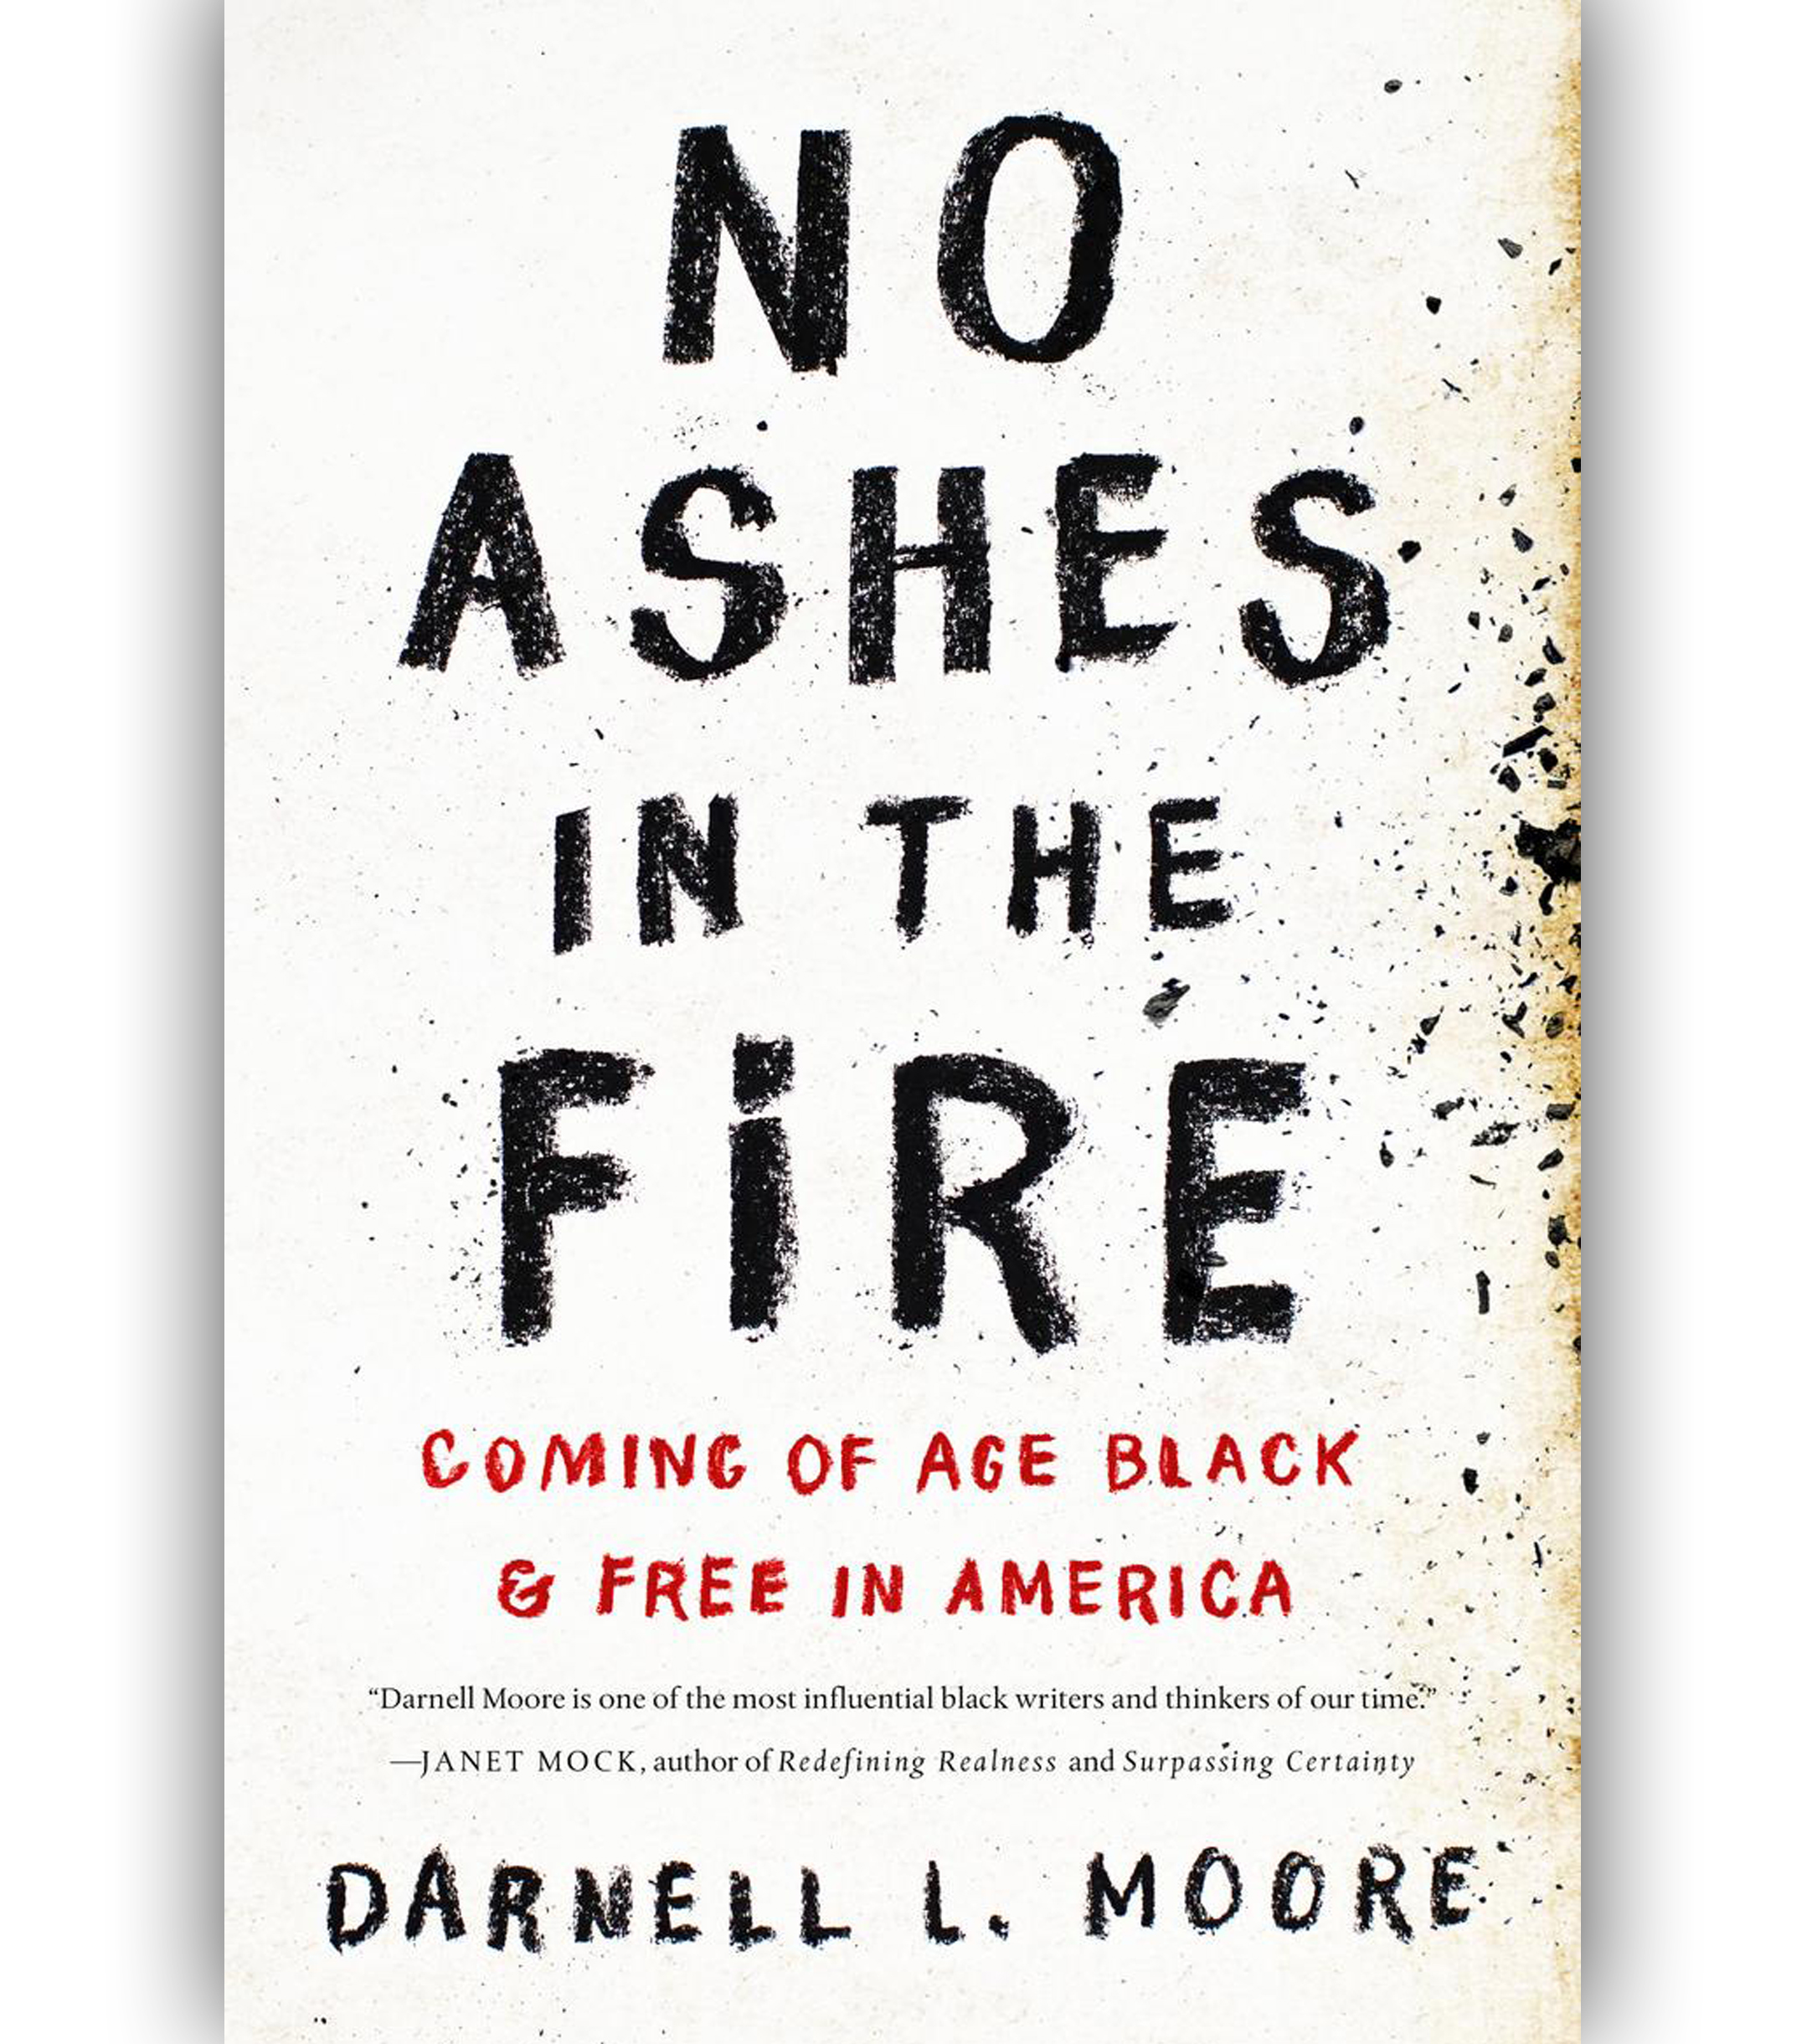 No Ashes In The Fire by Darnell L. Moore Book Cover